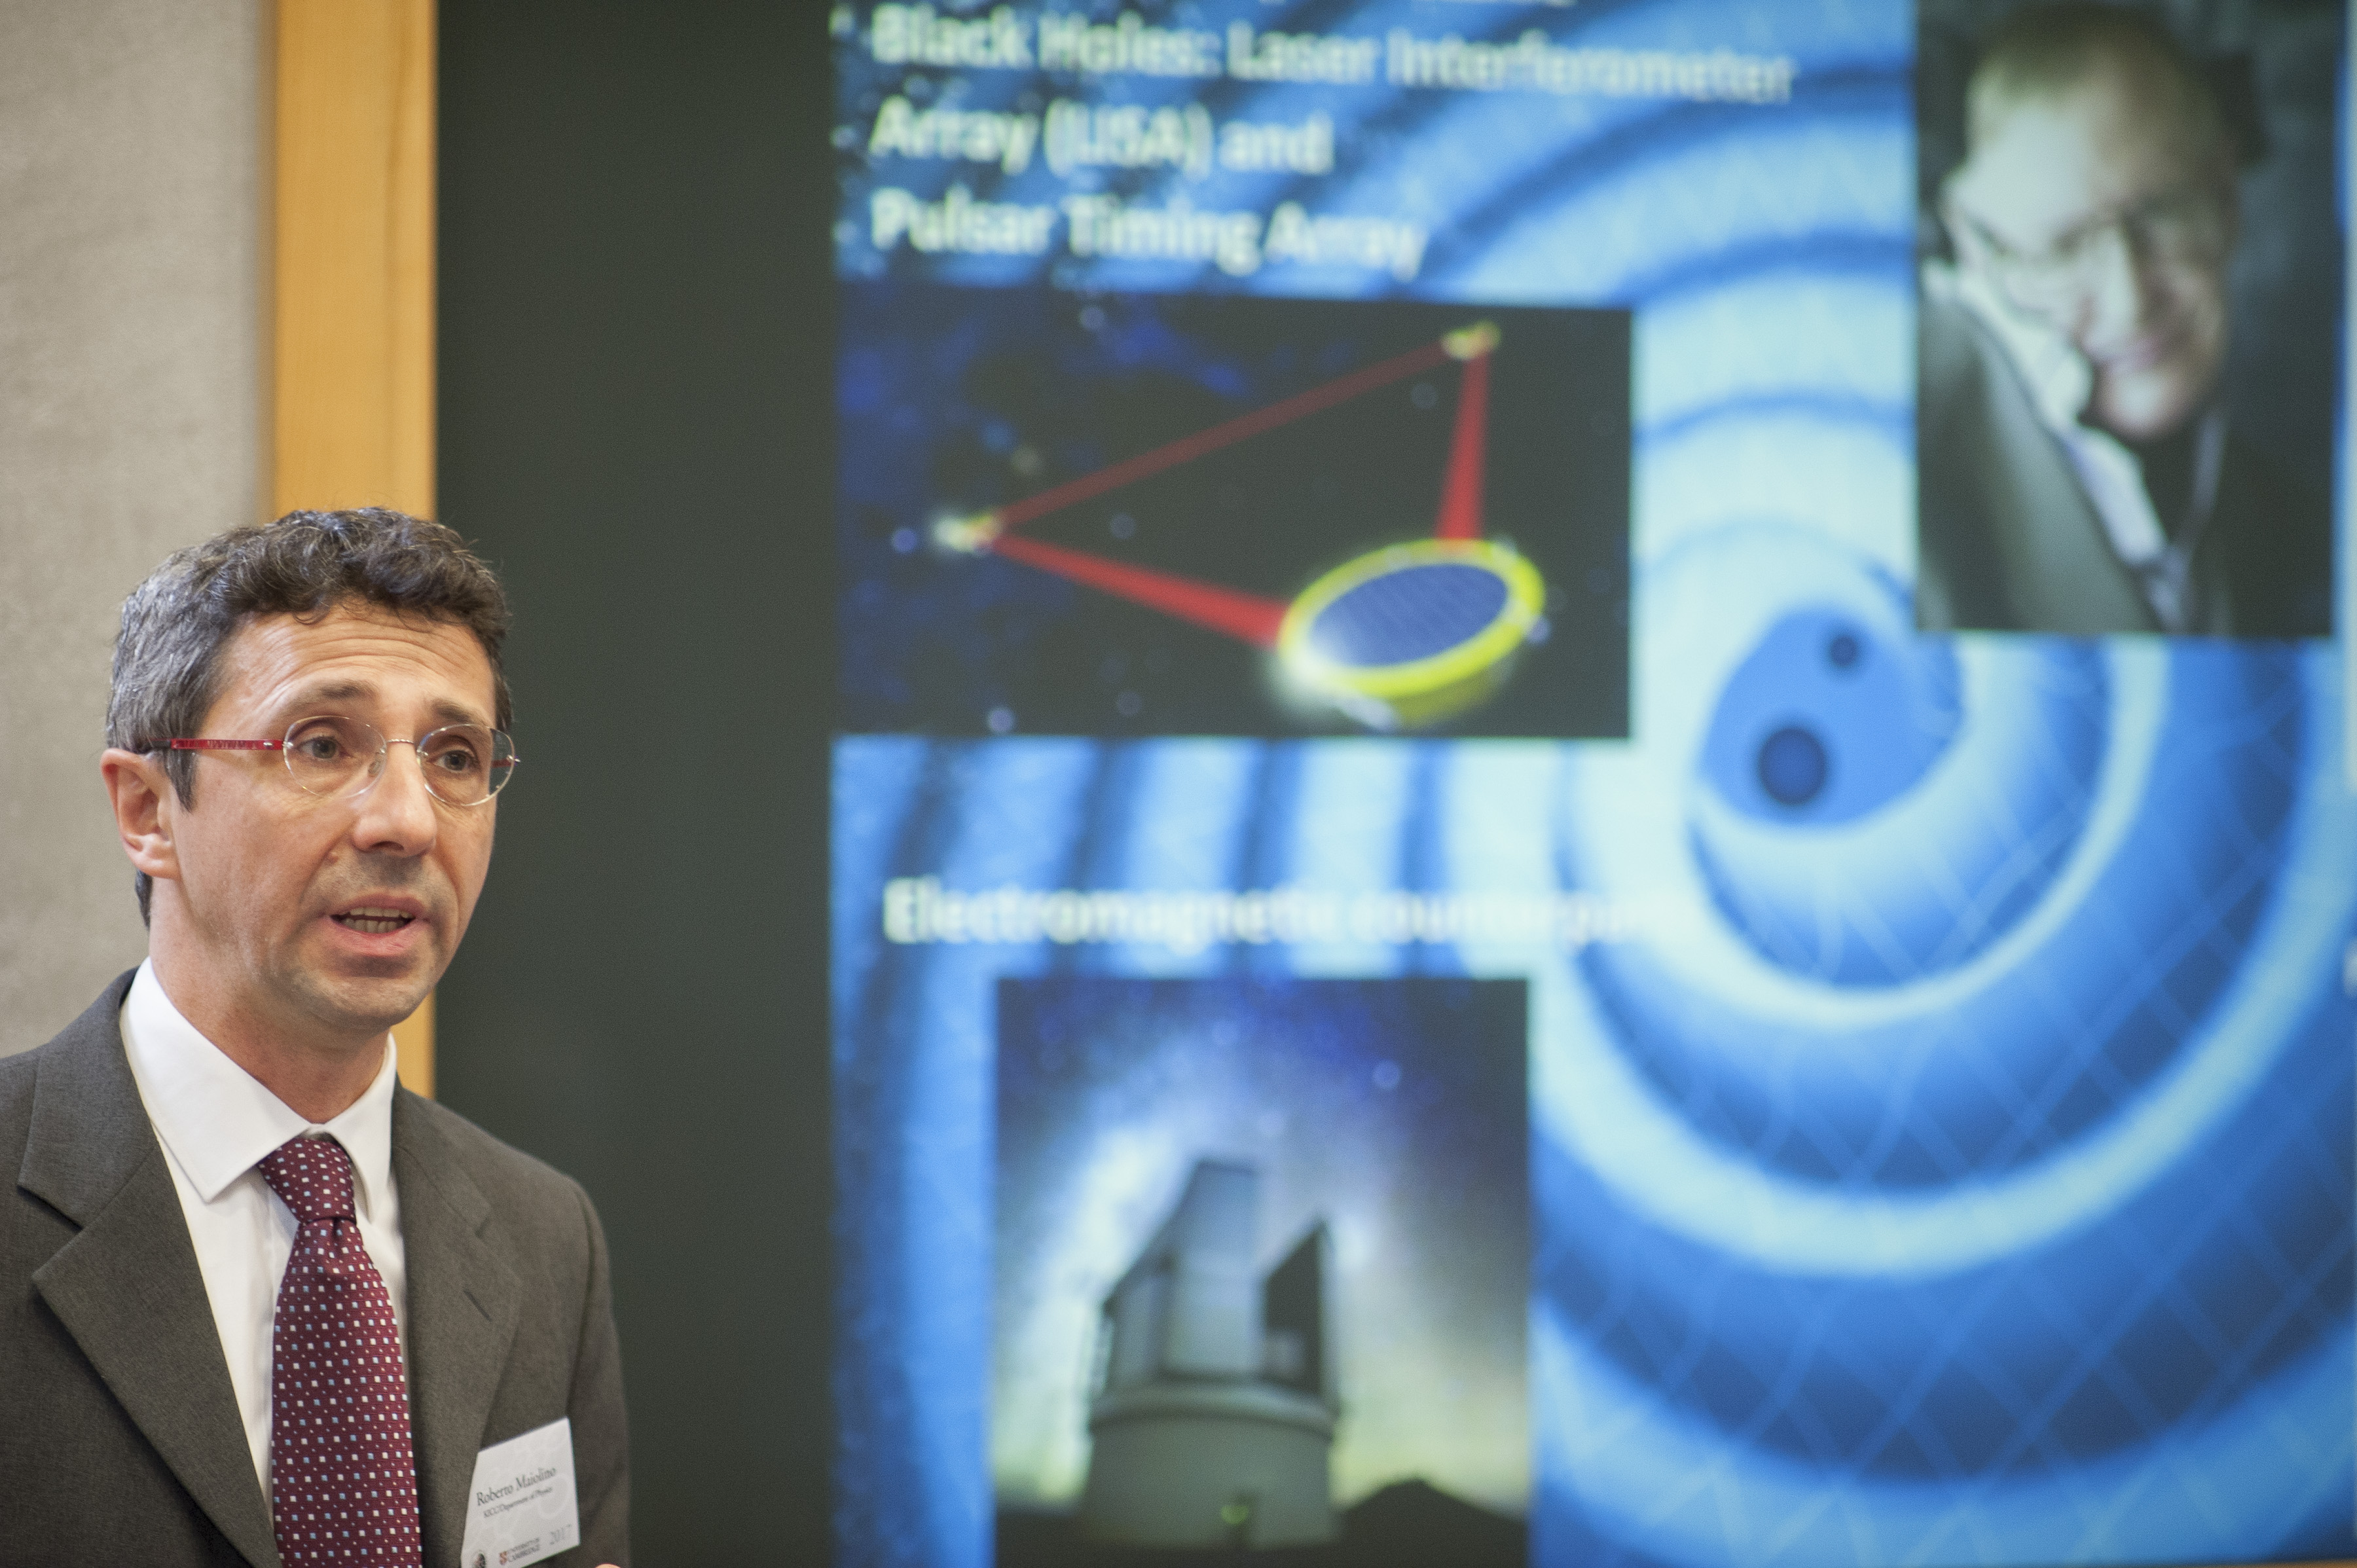 Roberto Maiolino, giving an overview of the Kavli Institute for Cosmology